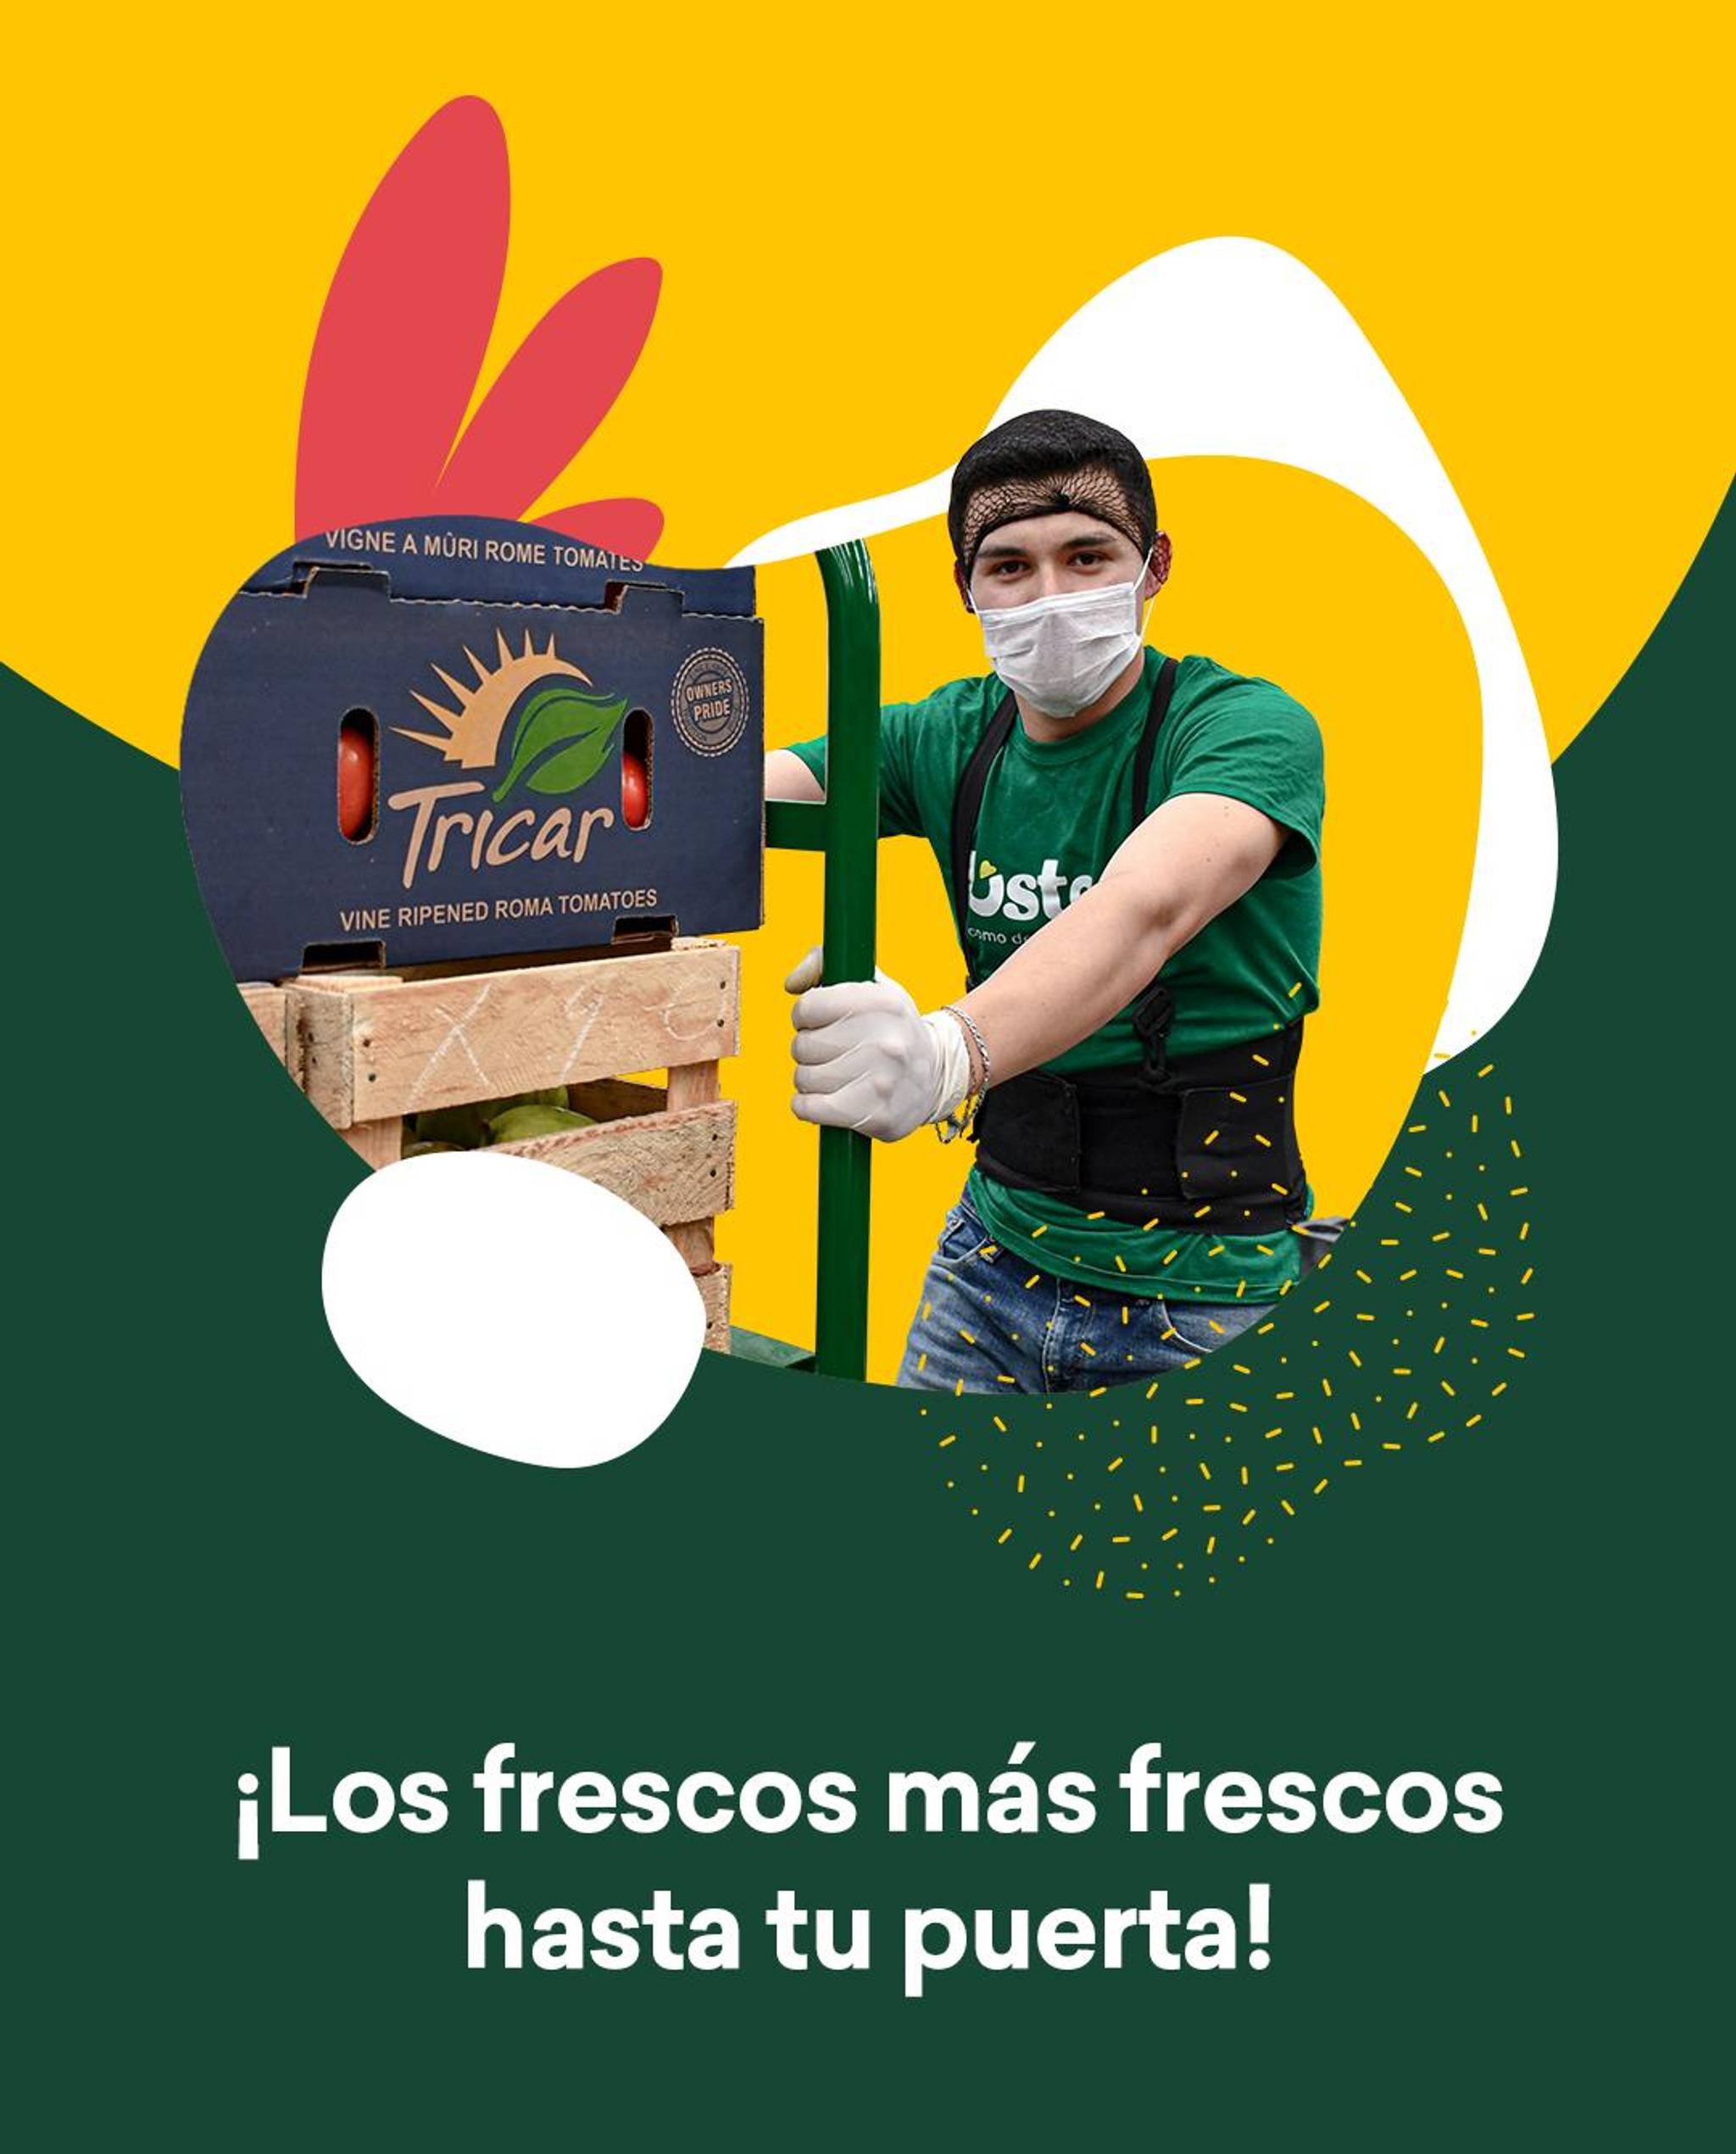 Jüsto feeds Mexicans' appetite for online groceries